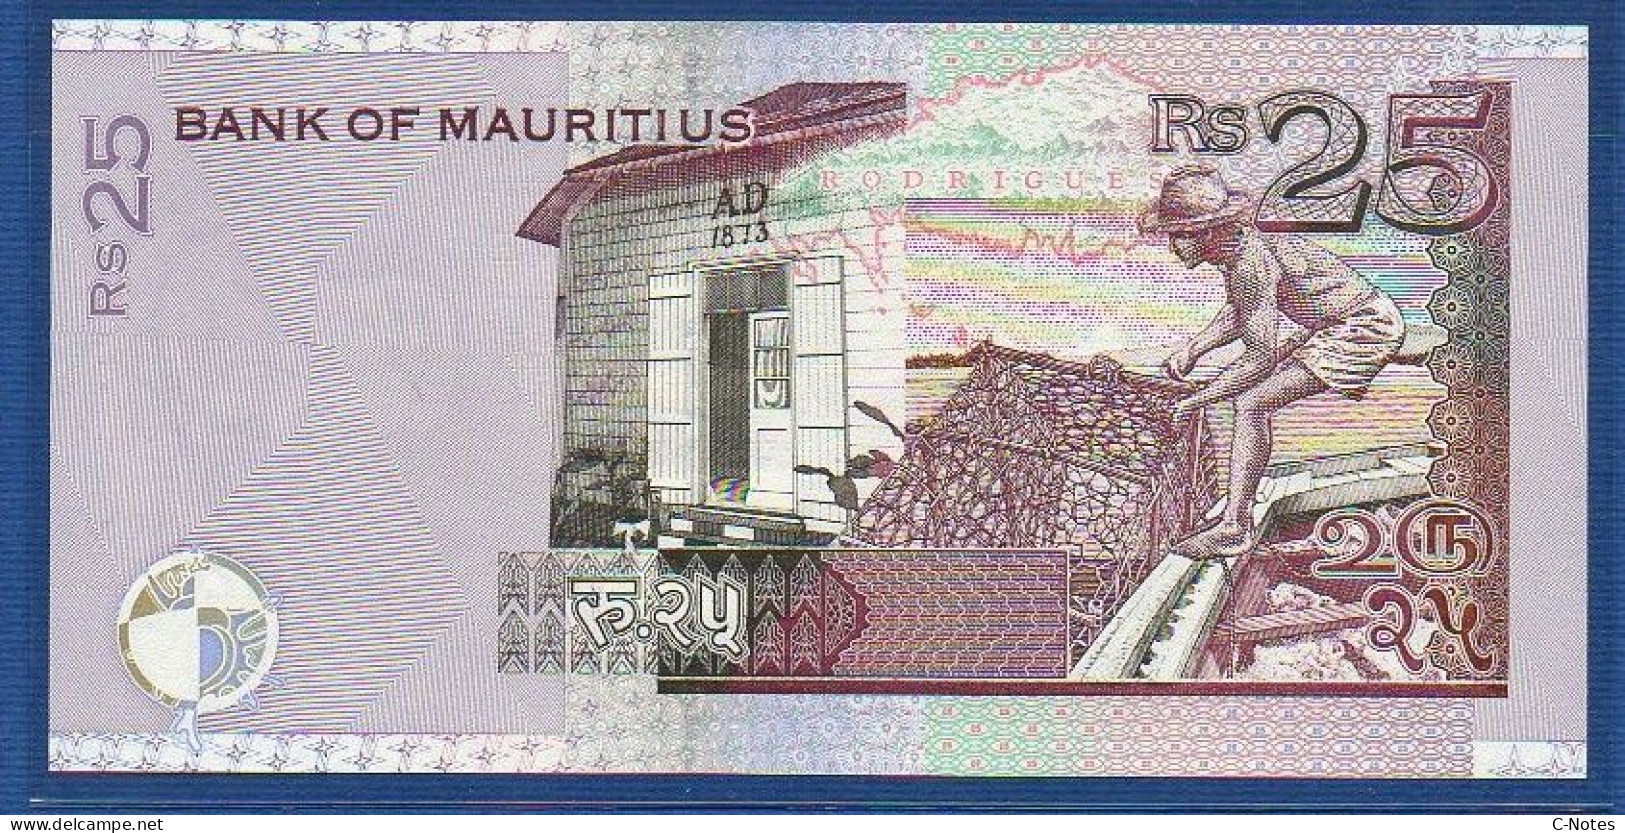 MAURITIUS - P.49a – 25 Rupees 1999 UNC, Serie AB636221 - Maurice